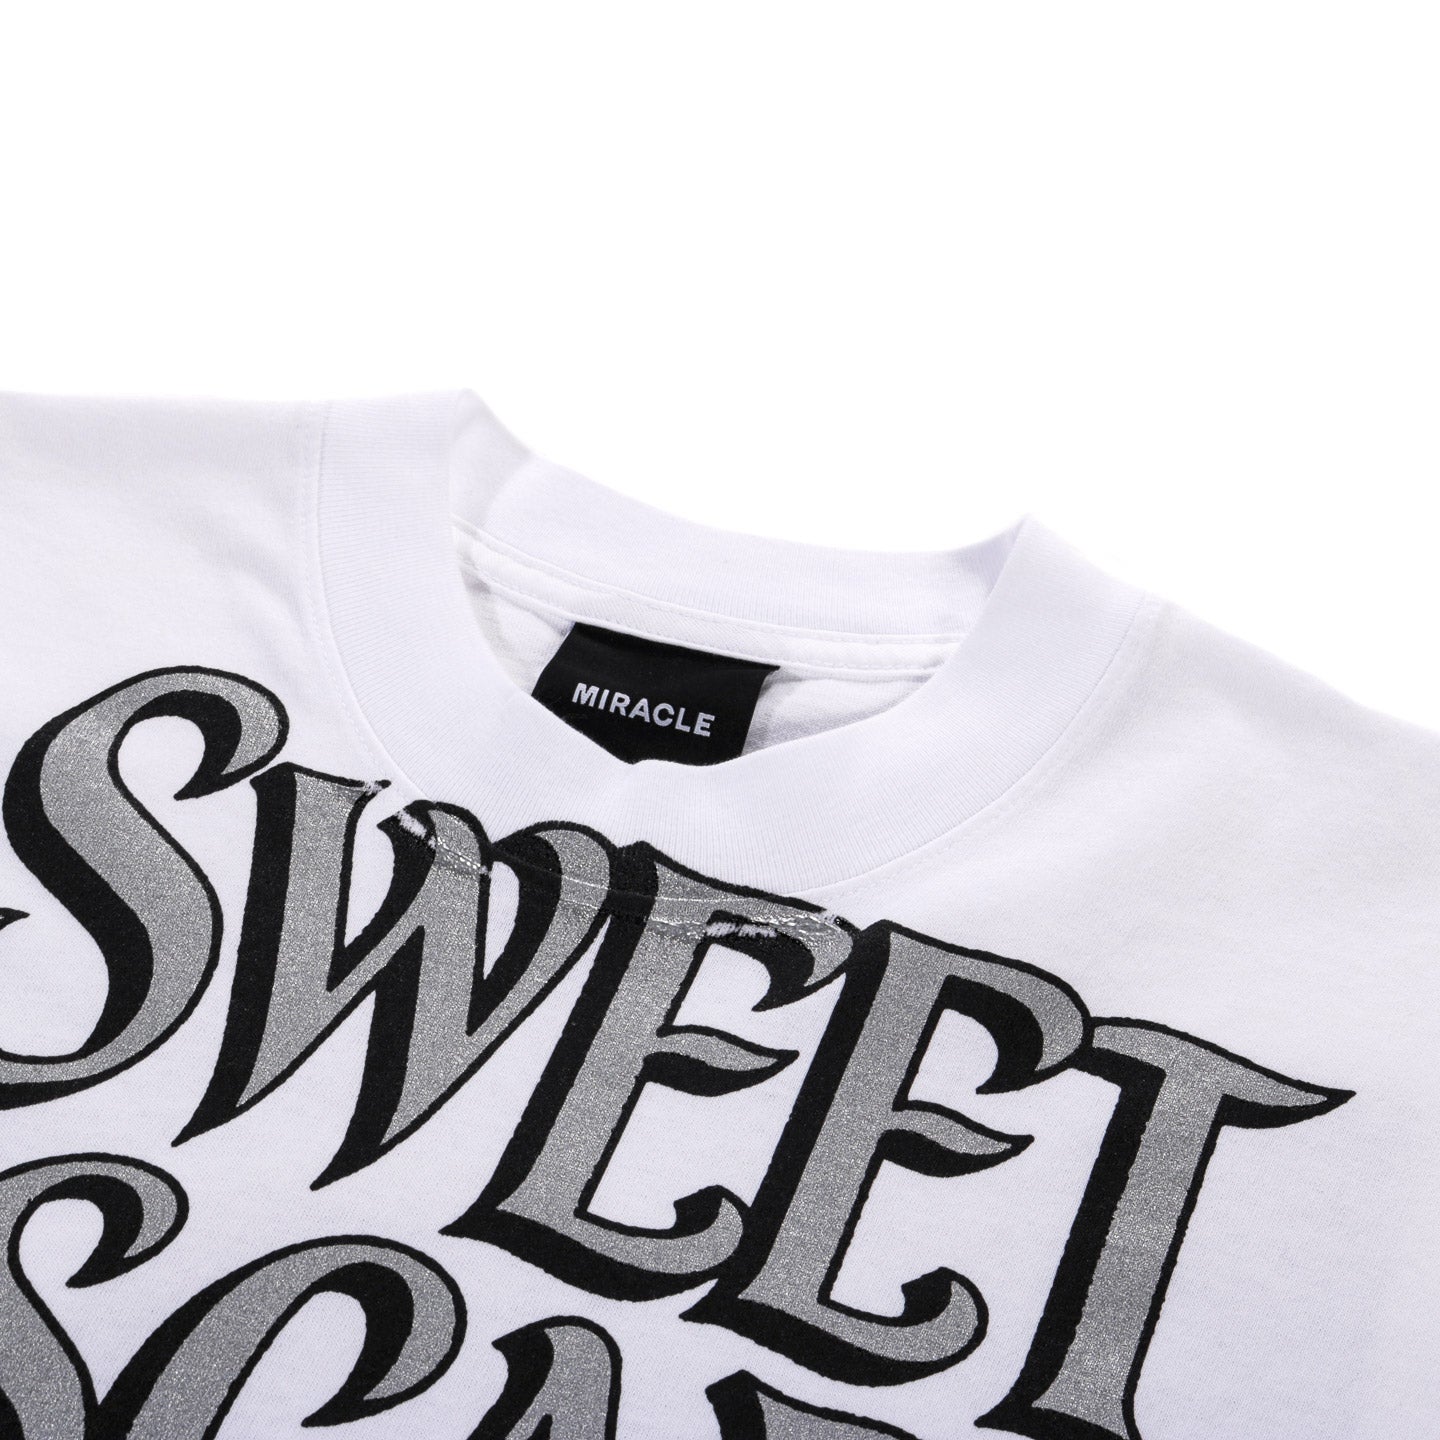 HOUSE OF MIRACLES SWEET SURRENDER T-SHIRT WHITE